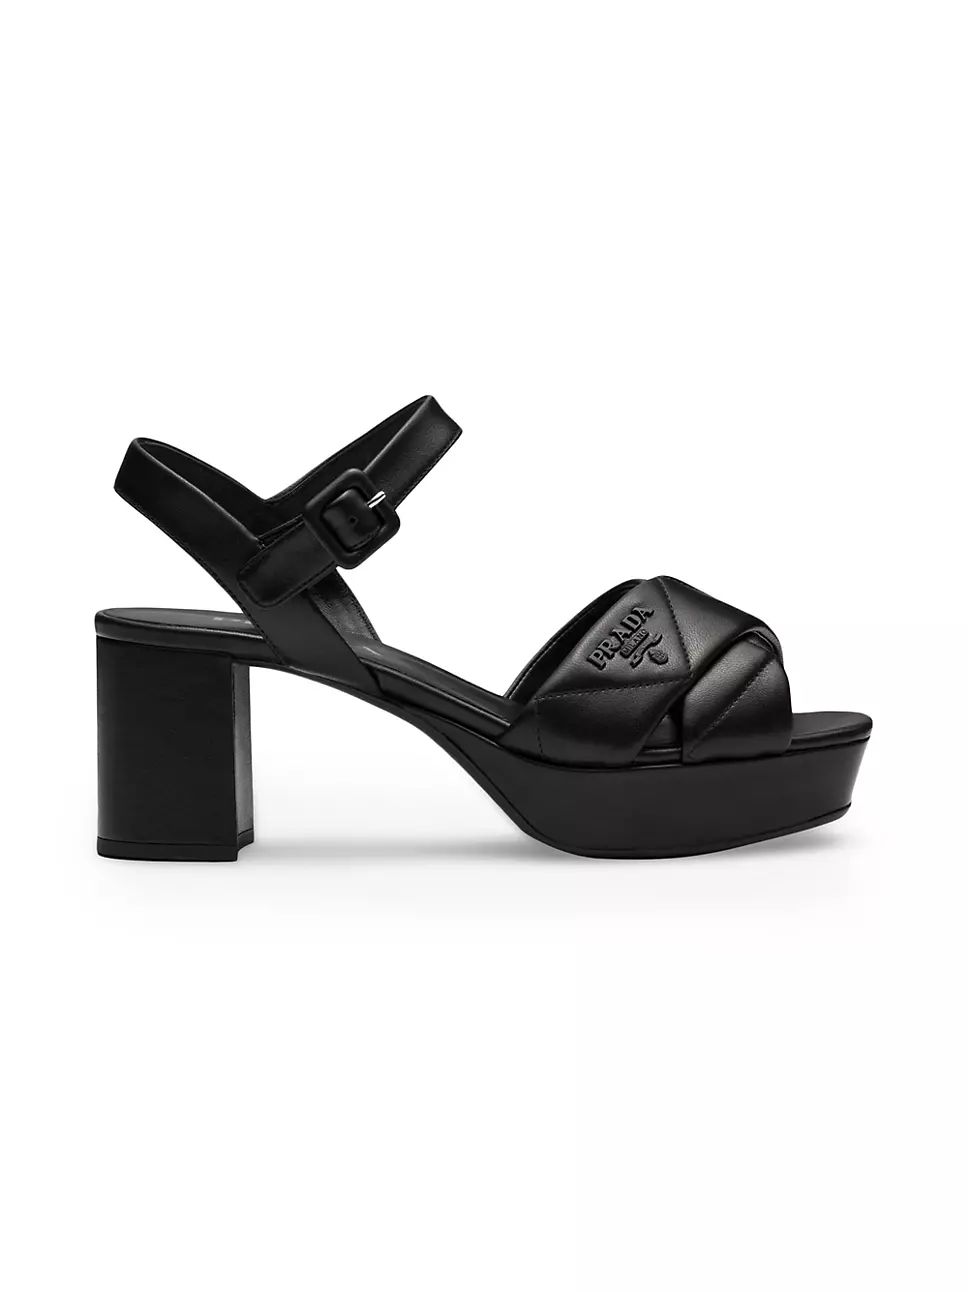 Quilted Nappa Leather Platform Sandals | Saks Fifth Avenue